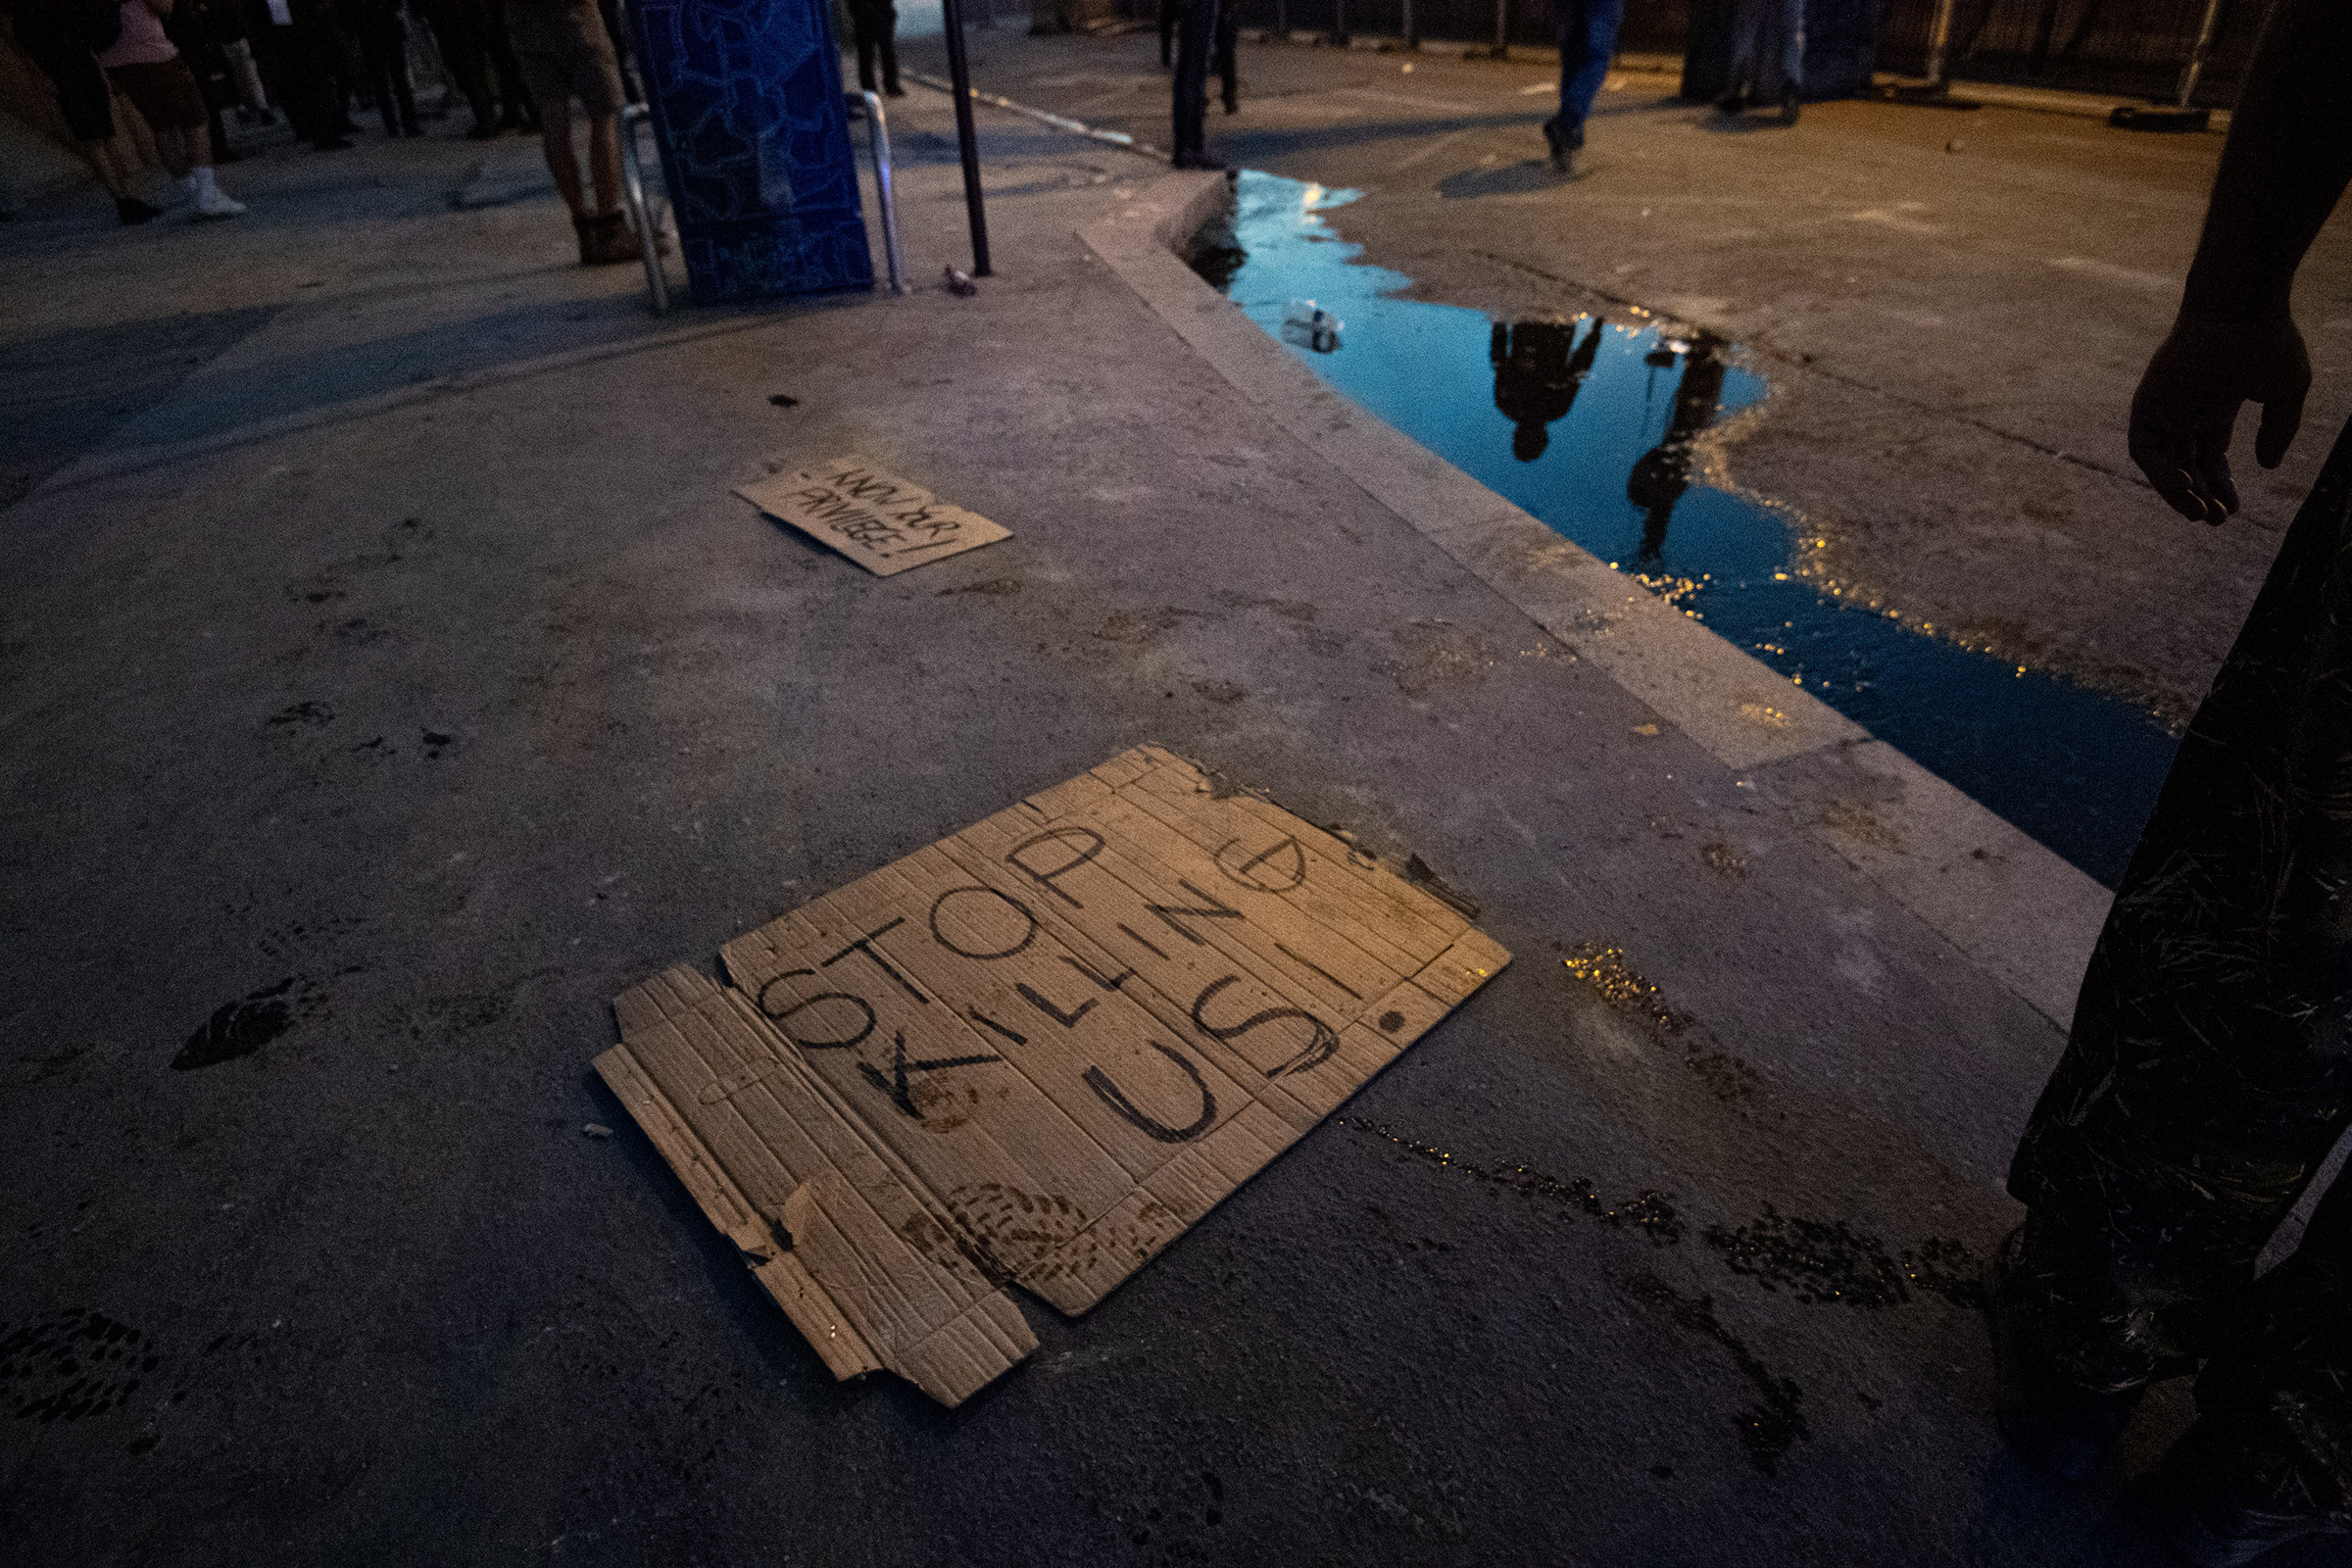 Signs are seen on the floor after clashes erupt following the intervention of security forces in a protest against police brutality at the Tribunal de Paris courthouse on June 2. (Julien Benjamin Guillaume Mattia—Anadolu Agency/Getty Images)